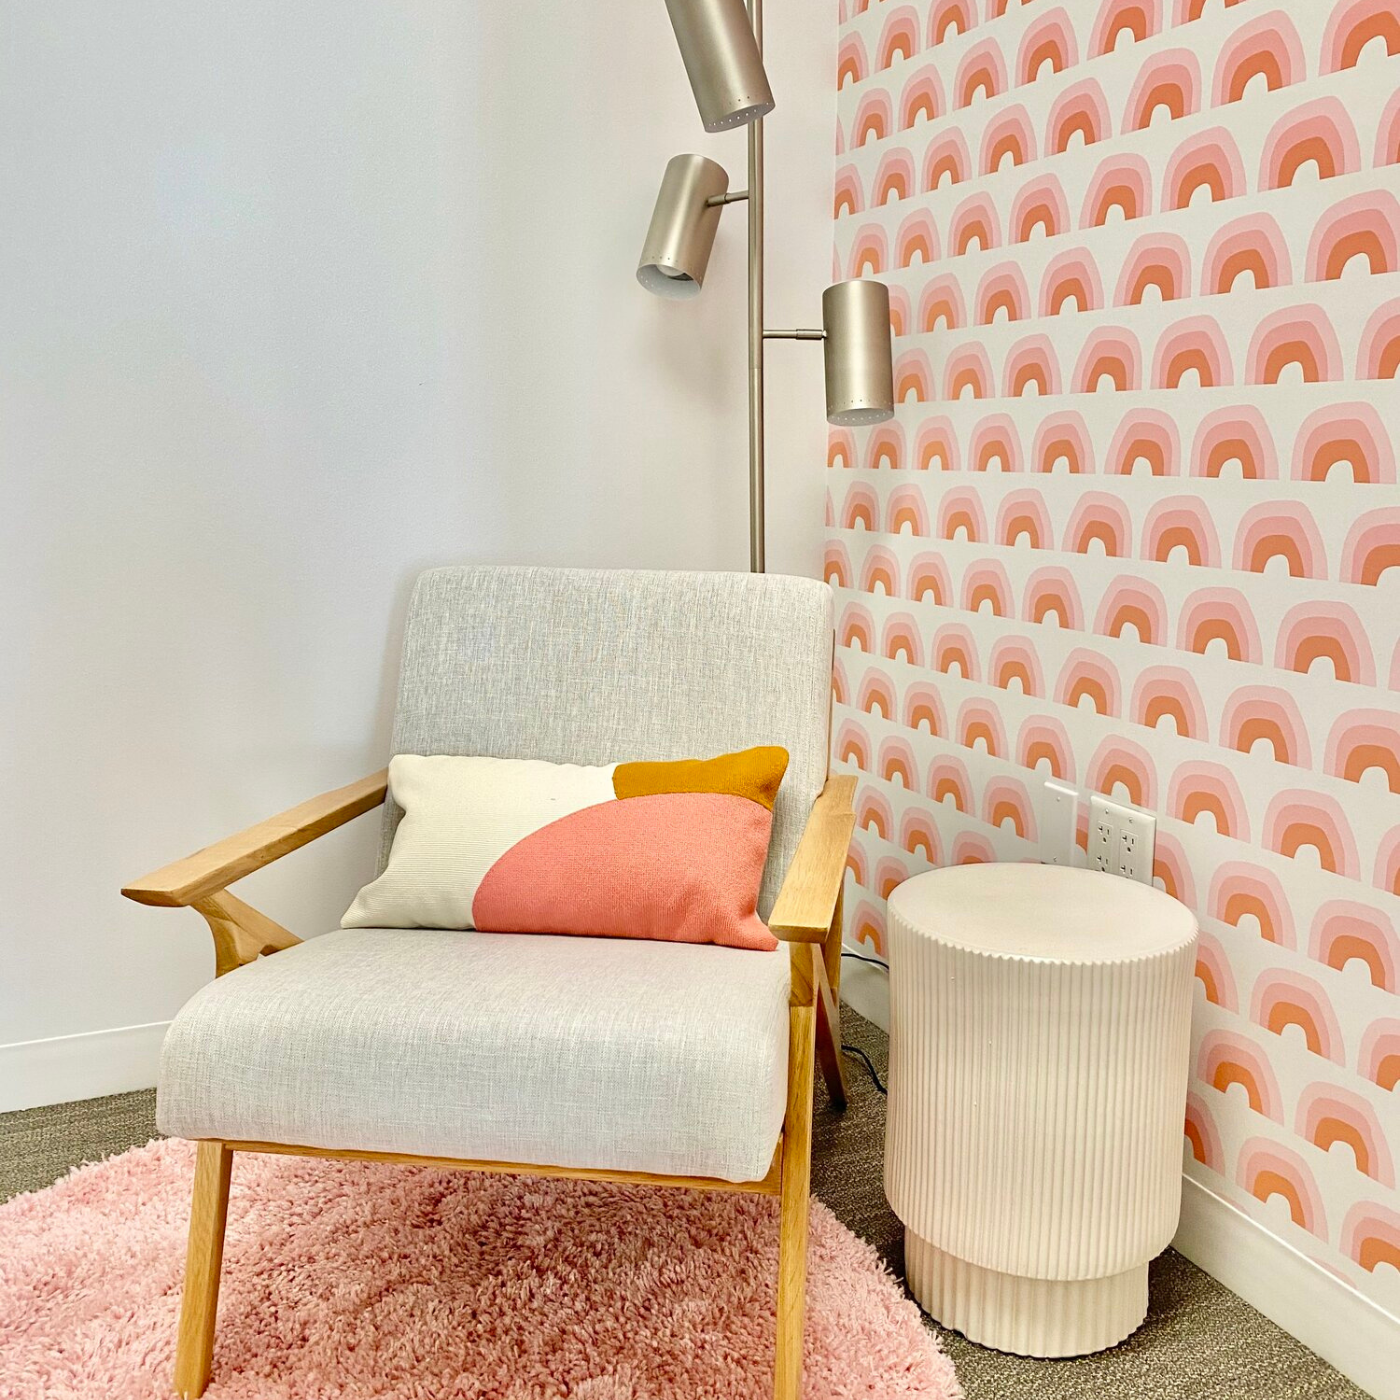 A gray fabric chair with thin wooden arms and legs and a white, brown and pink pillow on top sits on a small round pink shag rug. A silver lamp with three light bulbs sits behind it and a small round cream table sits to the chair’s left. The wall on the left is cream. The wall on the right has a cream background and repeating rows of small brown and pink rainbows.